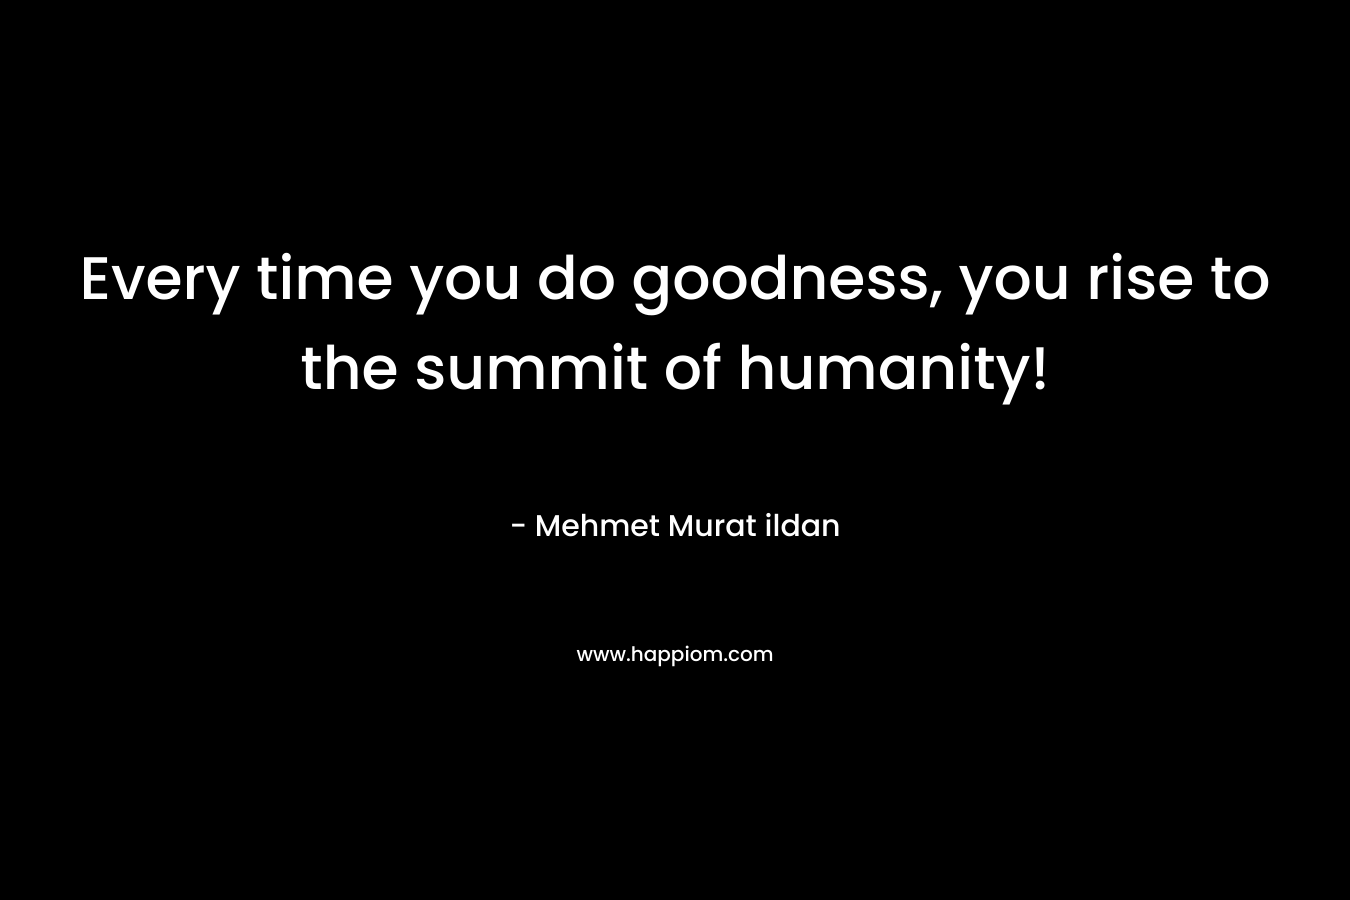 Every time you do goodness, you rise to the summit of humanity! – Mehmet Murat ildan